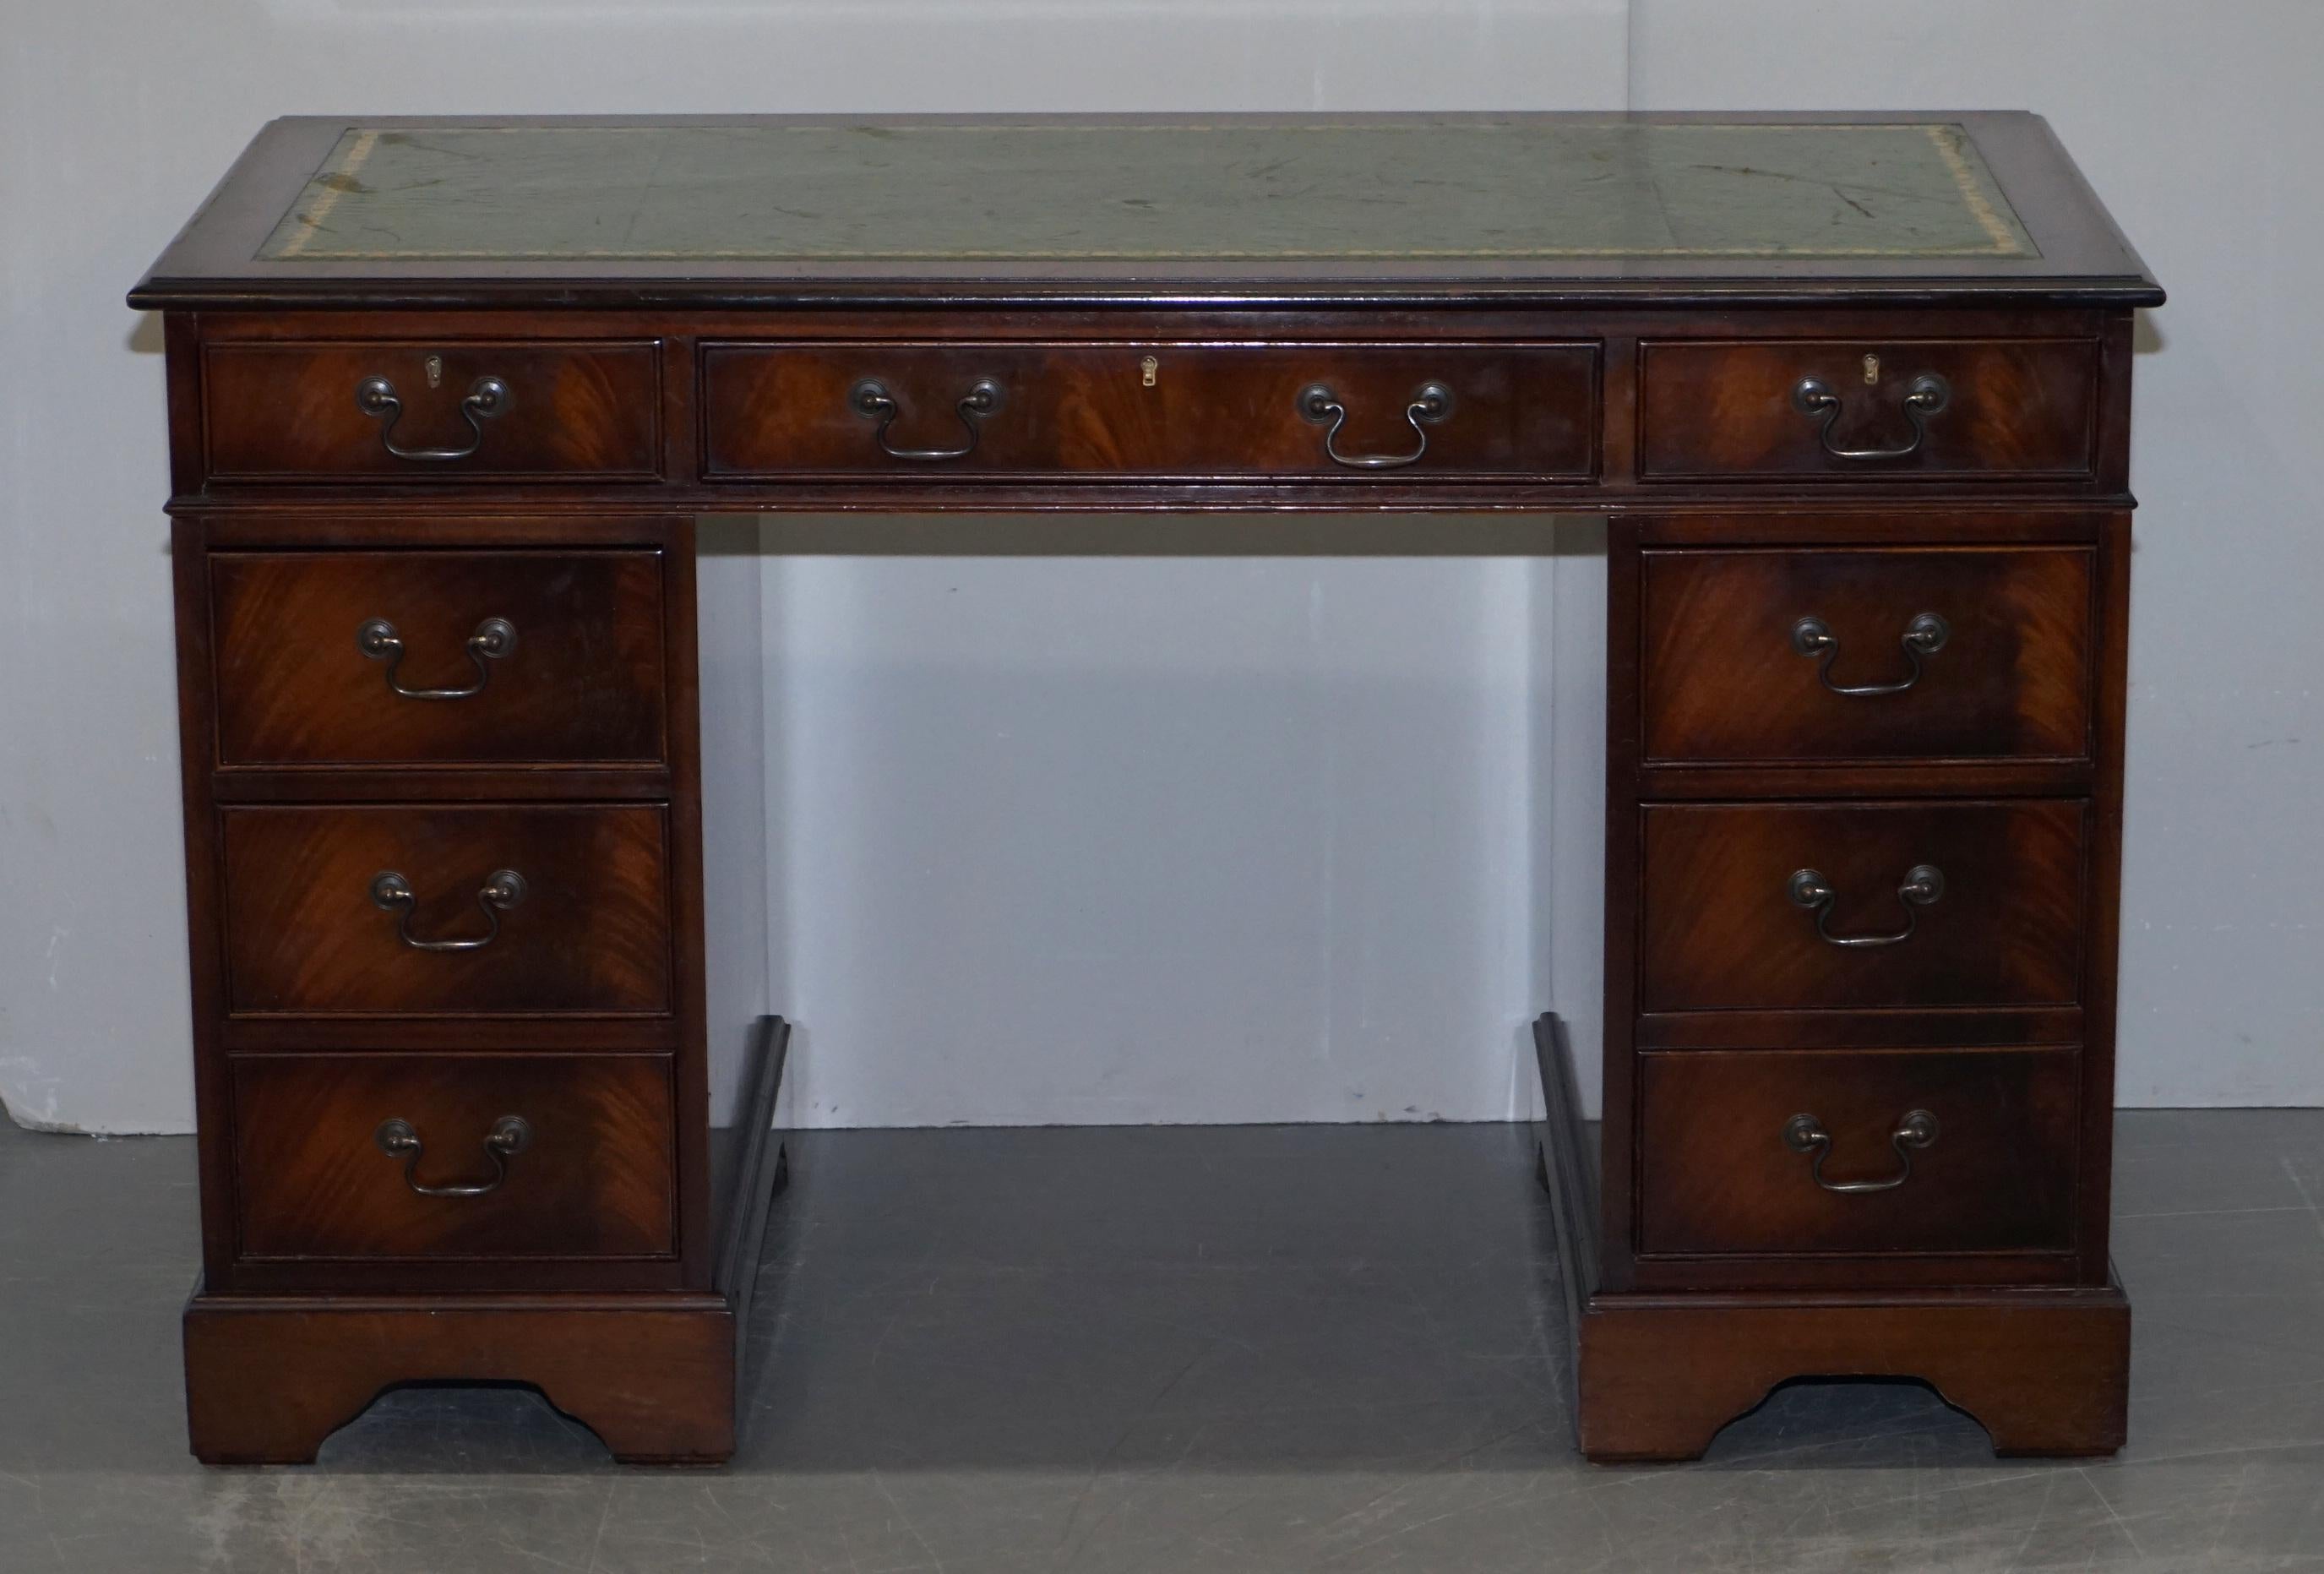 We are delighted to offer for sale this lovely vintage flamed mahogany twin pedestal partner desk with aged green leather writing surface

A good looking well made and nice sized desk.

The desk splits into three easy to transport pieces, it has